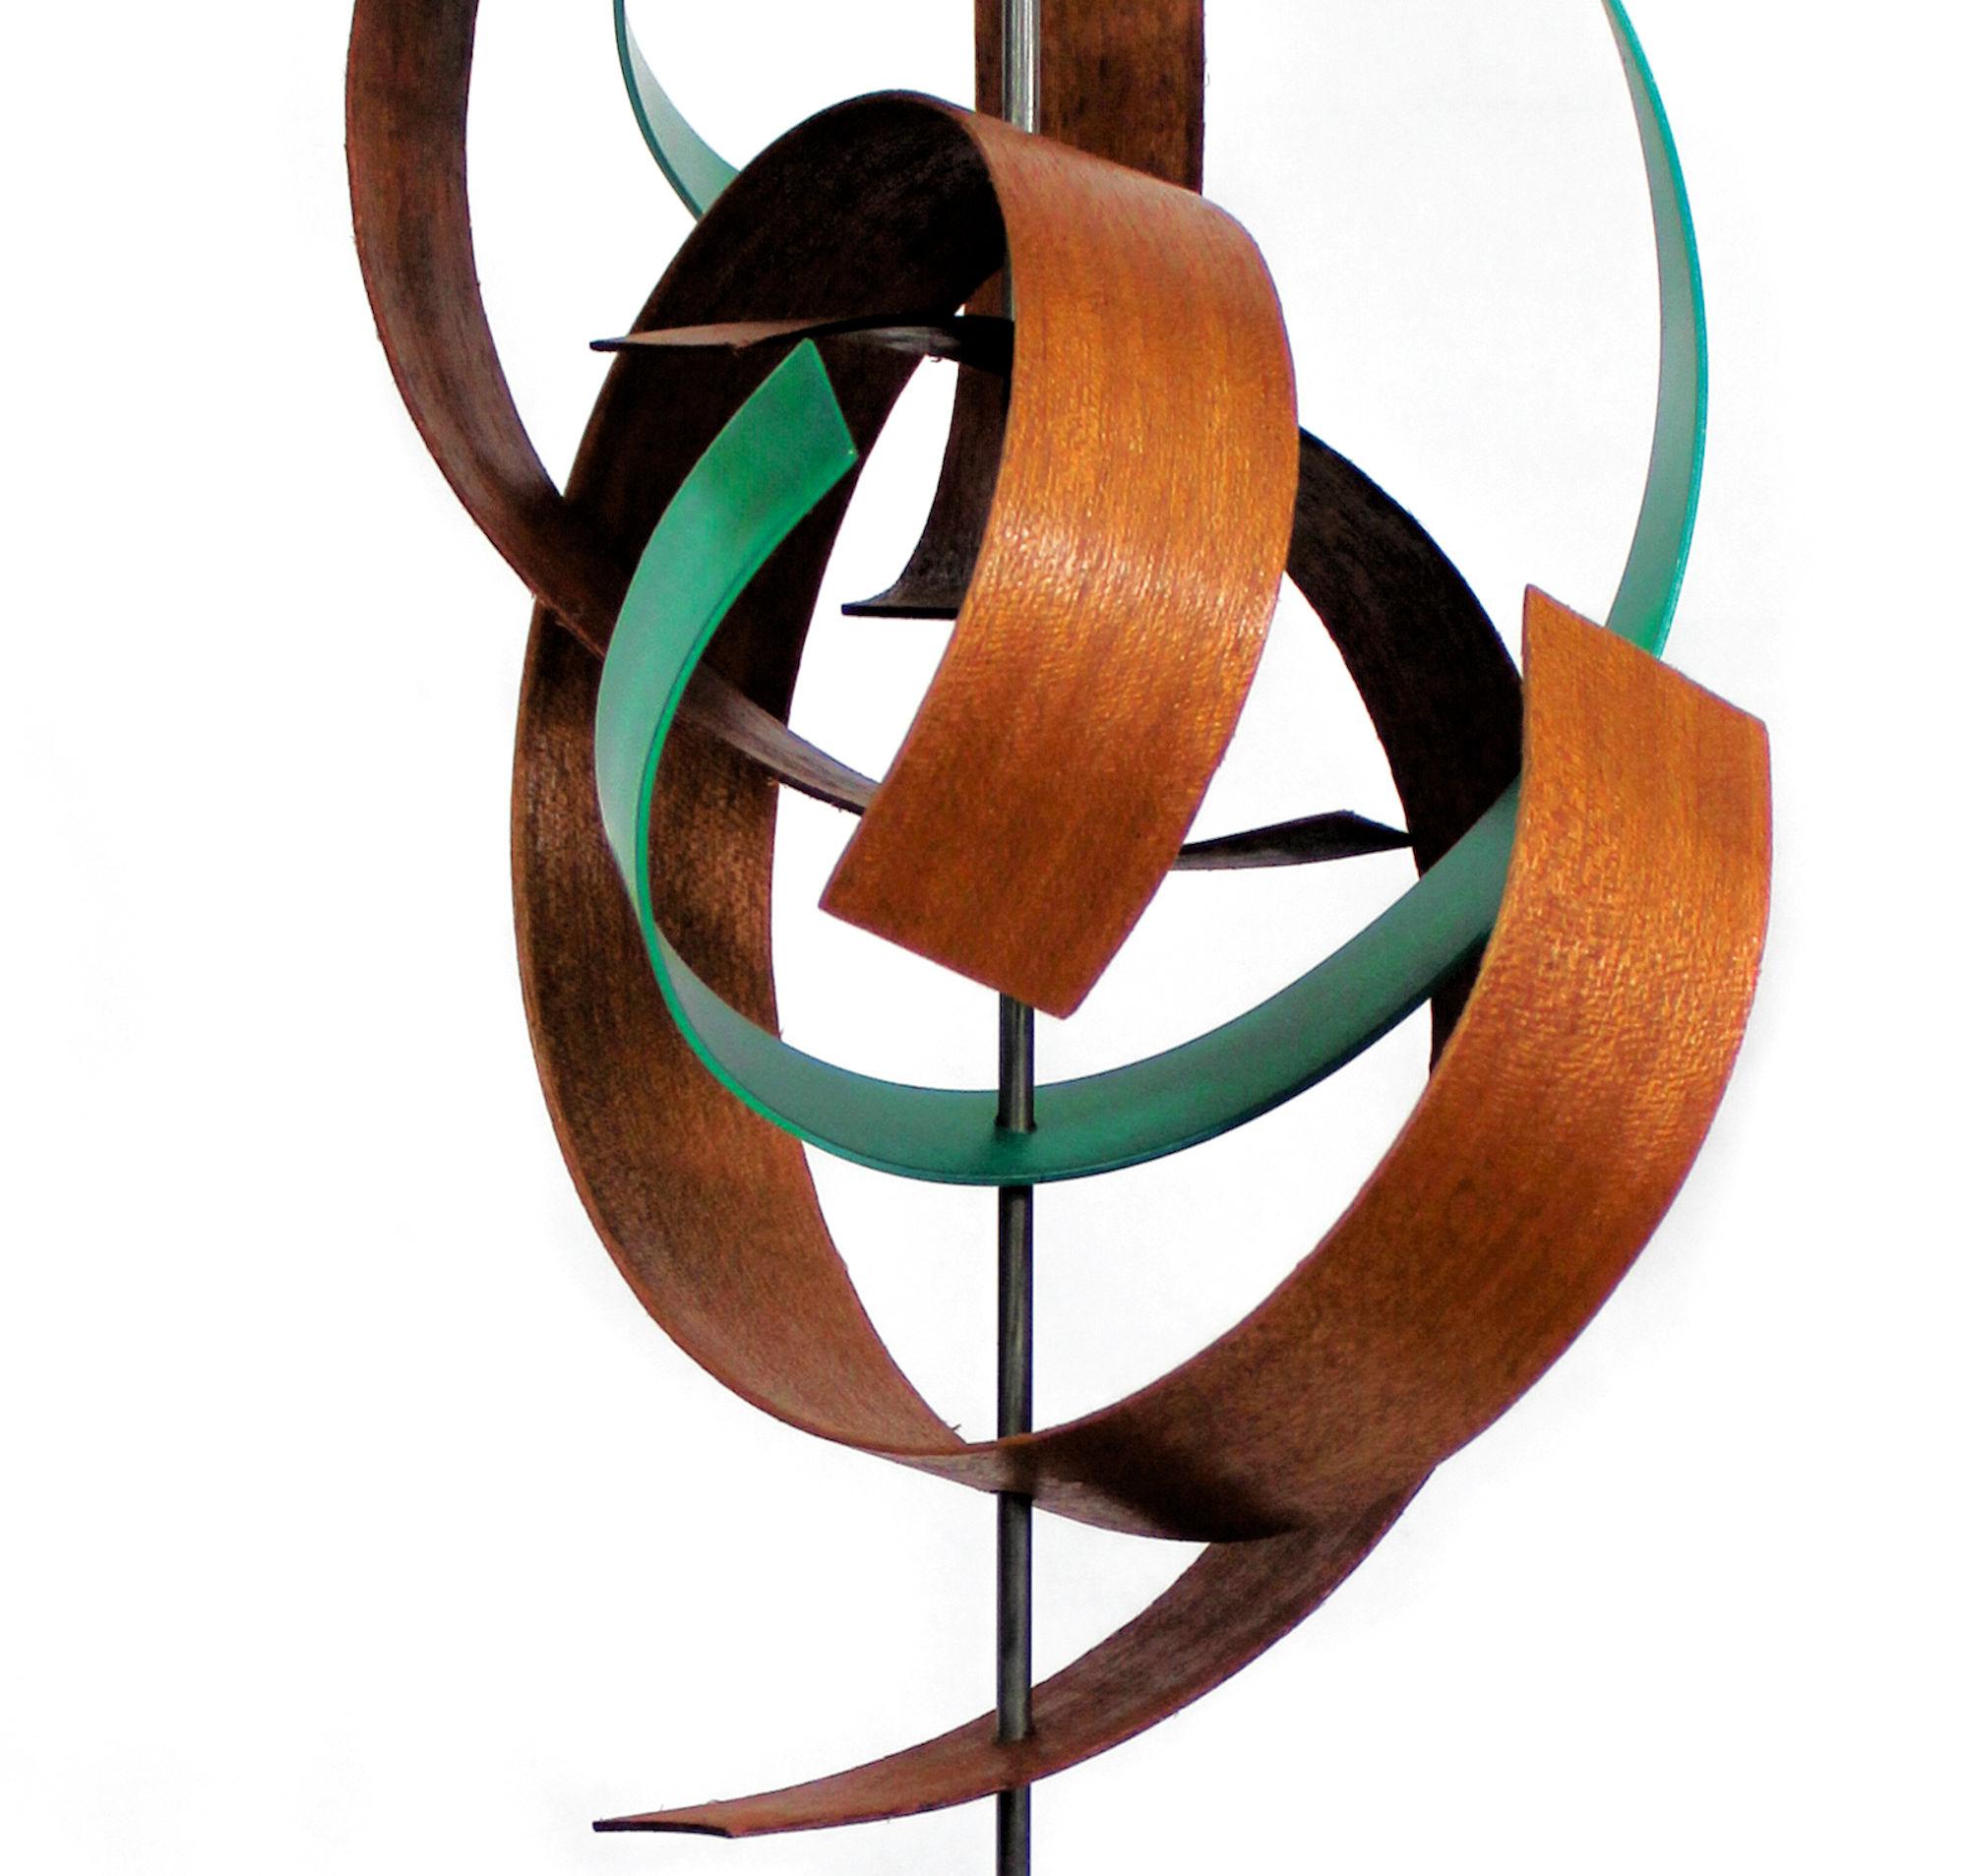 Description:  This sculpture consists of pre-formed black walnut, mahogany, and tinted aluminum. Solid cherry base. This sculpture is an open-edition multiple original; hand-made by the artist.
Title: Intertwine

Artist Bio:
Jeff was born and raised